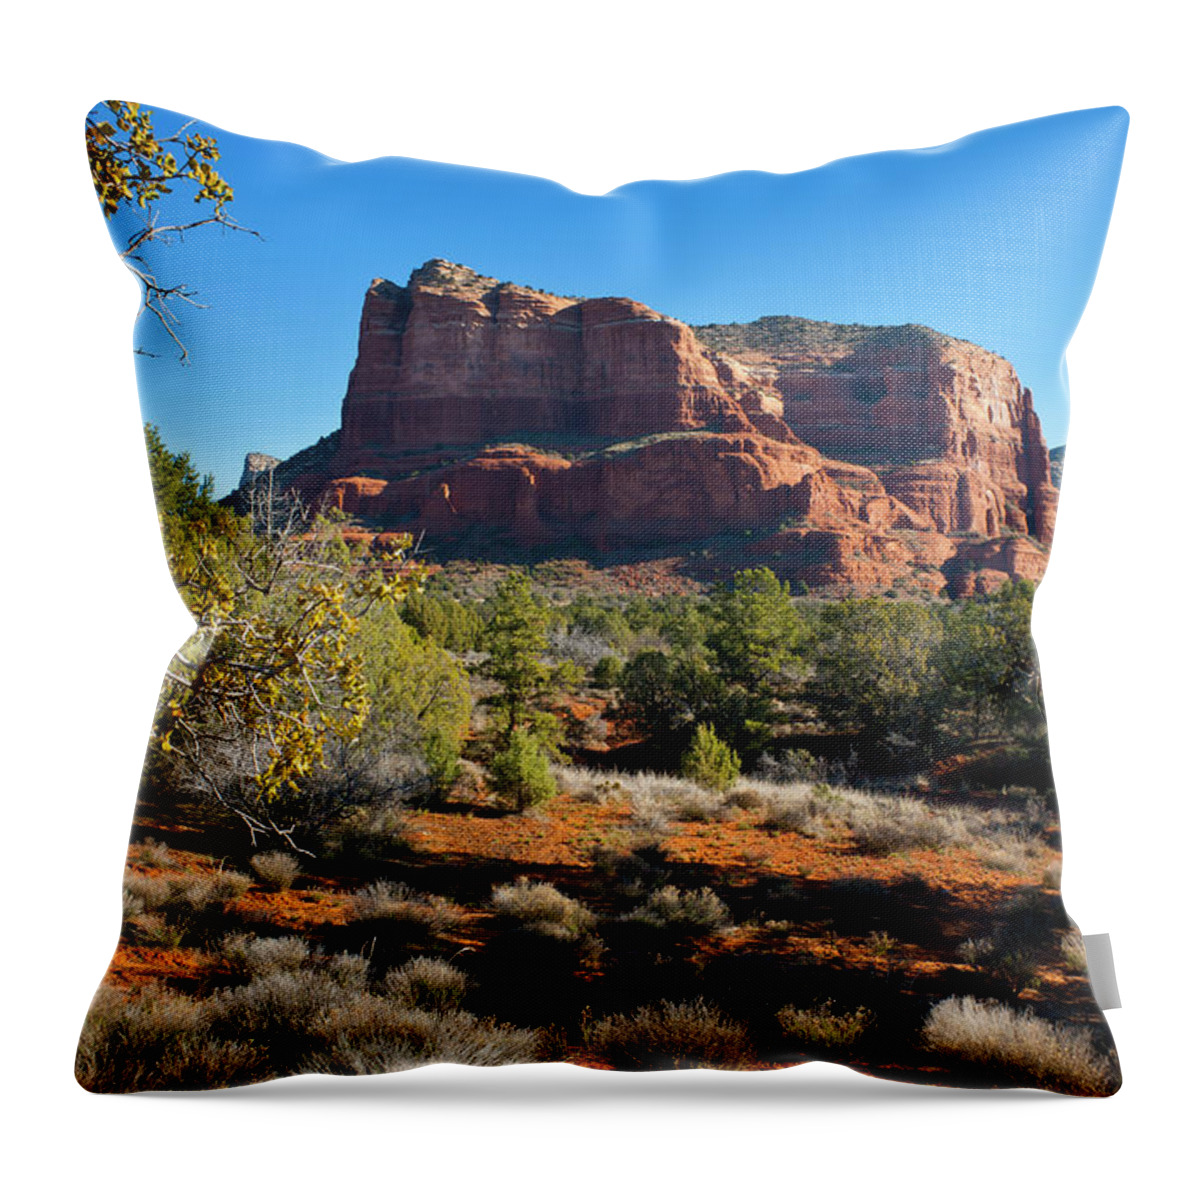 Scenics Throw Pillow featuring the photograph Castle Rock Near Sedona by Jacobh